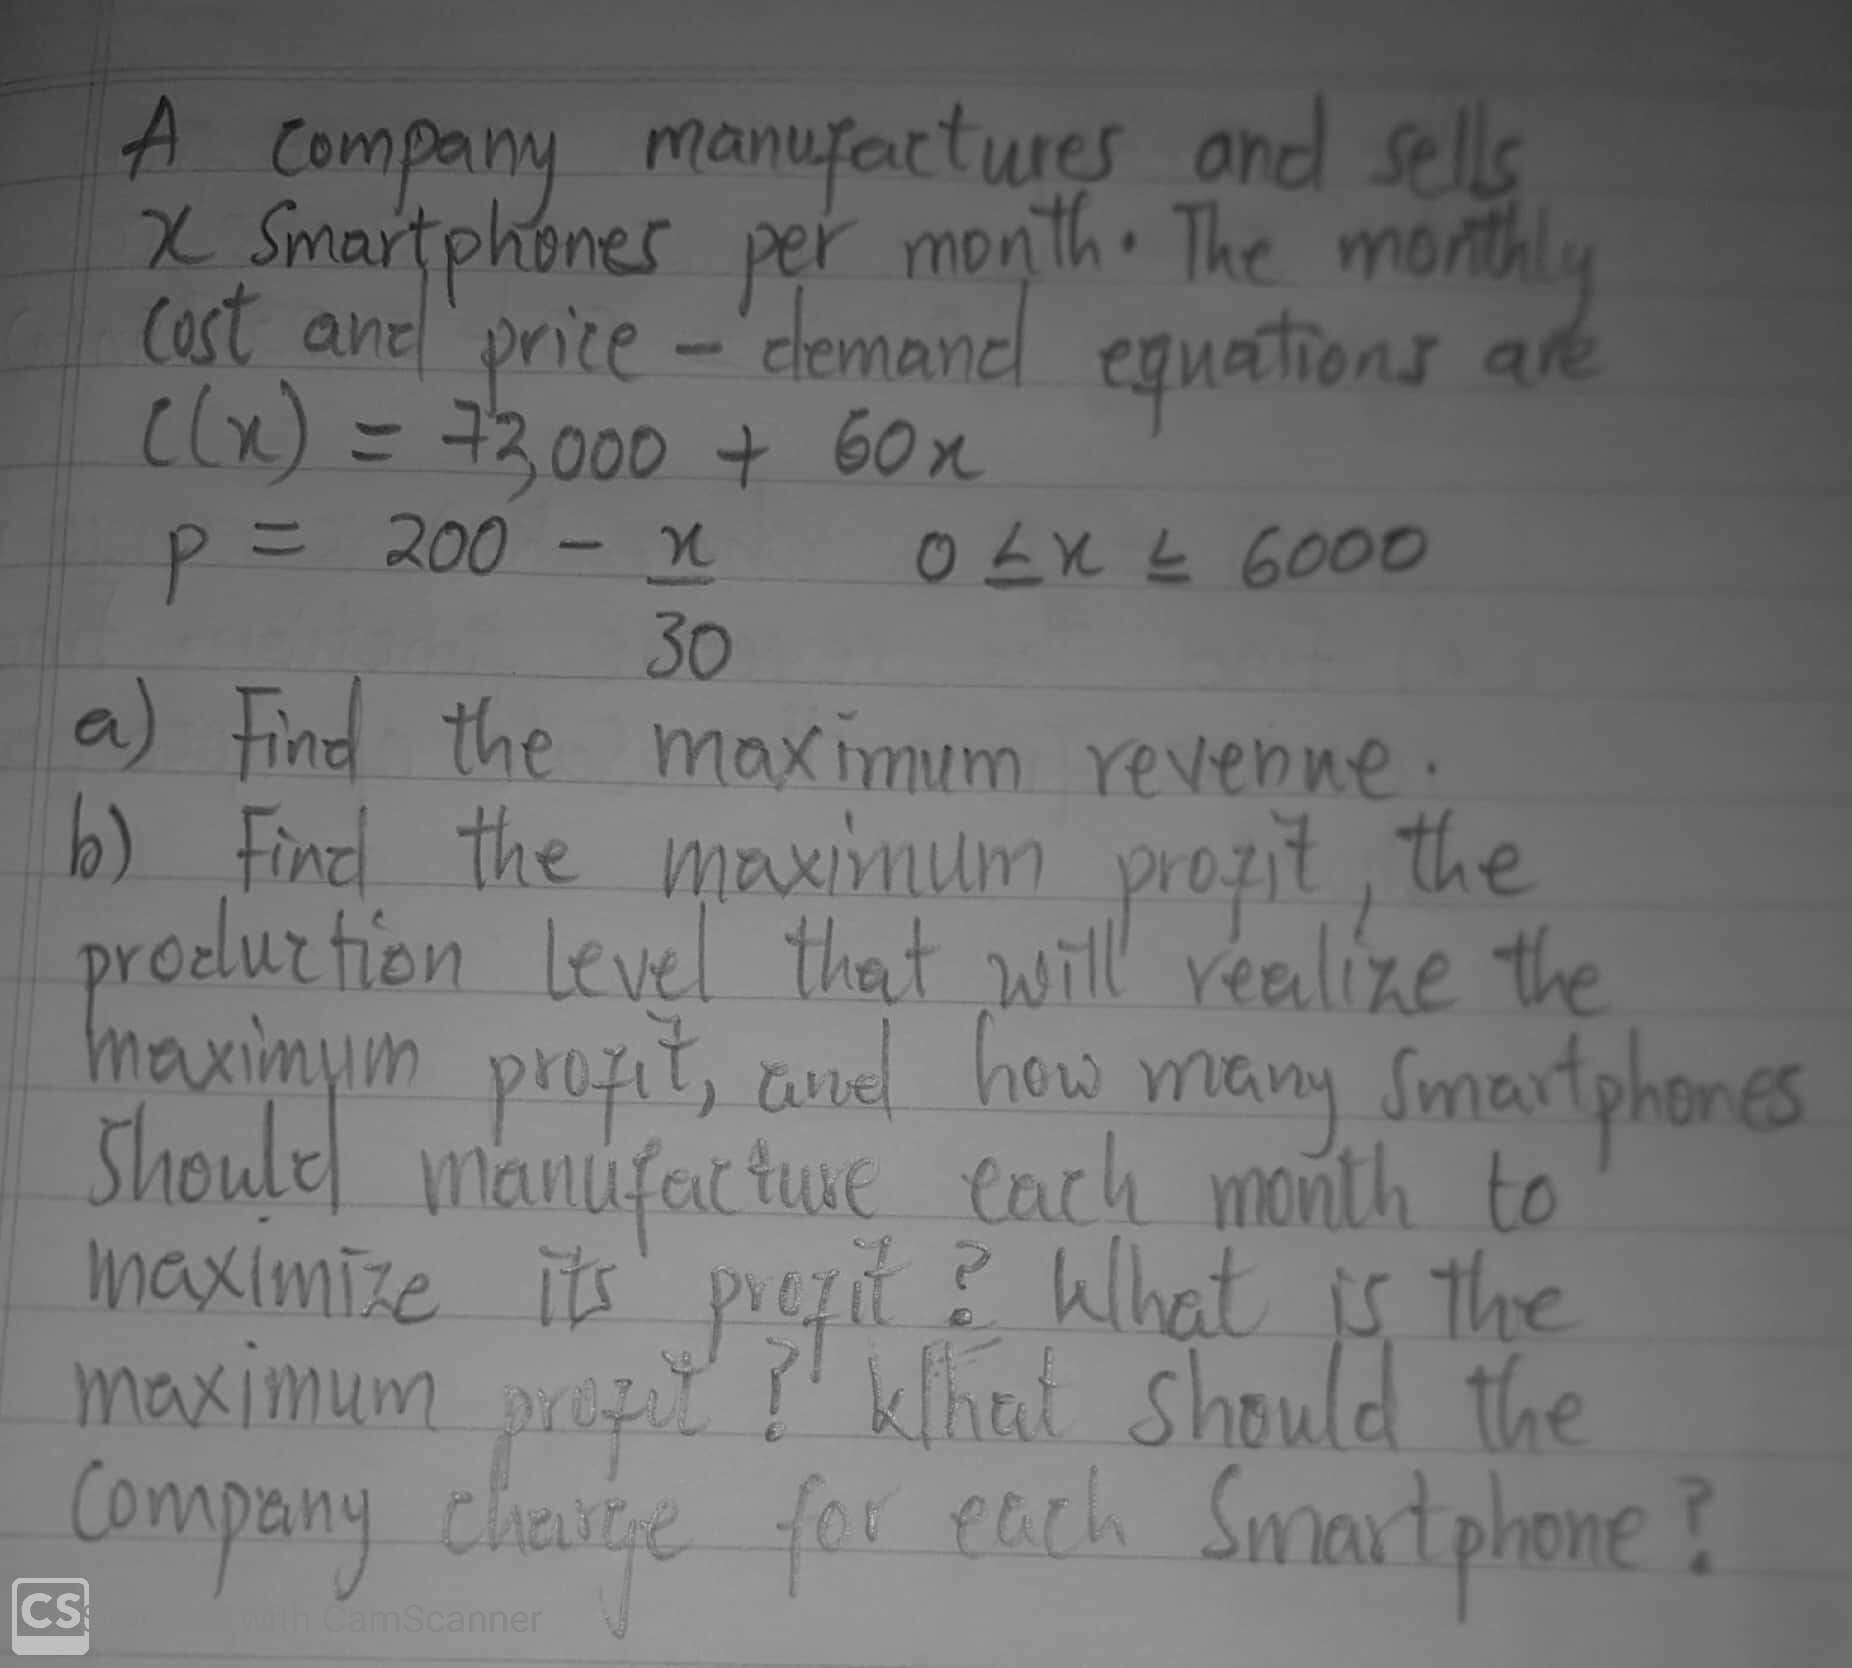 A Company
X Smartphones per month The monthly
cost ane price-'clemanel eguations are
clx) = 73000 60x
manufactures and sells
O LX L 6000
11
アニ 200
30
a) Find the
maximum revenne:
b) Fincl the maximum prozit , the
prodlur tien level that will realize the
Level thet will realize the
maximum
prozit, anel how Smartphon
Shoulel manufactuE each month to
its' preit ? What is the
many
maximize
Company klhat should the
Company charte Smortehone ?
for pach
maximum
propit
